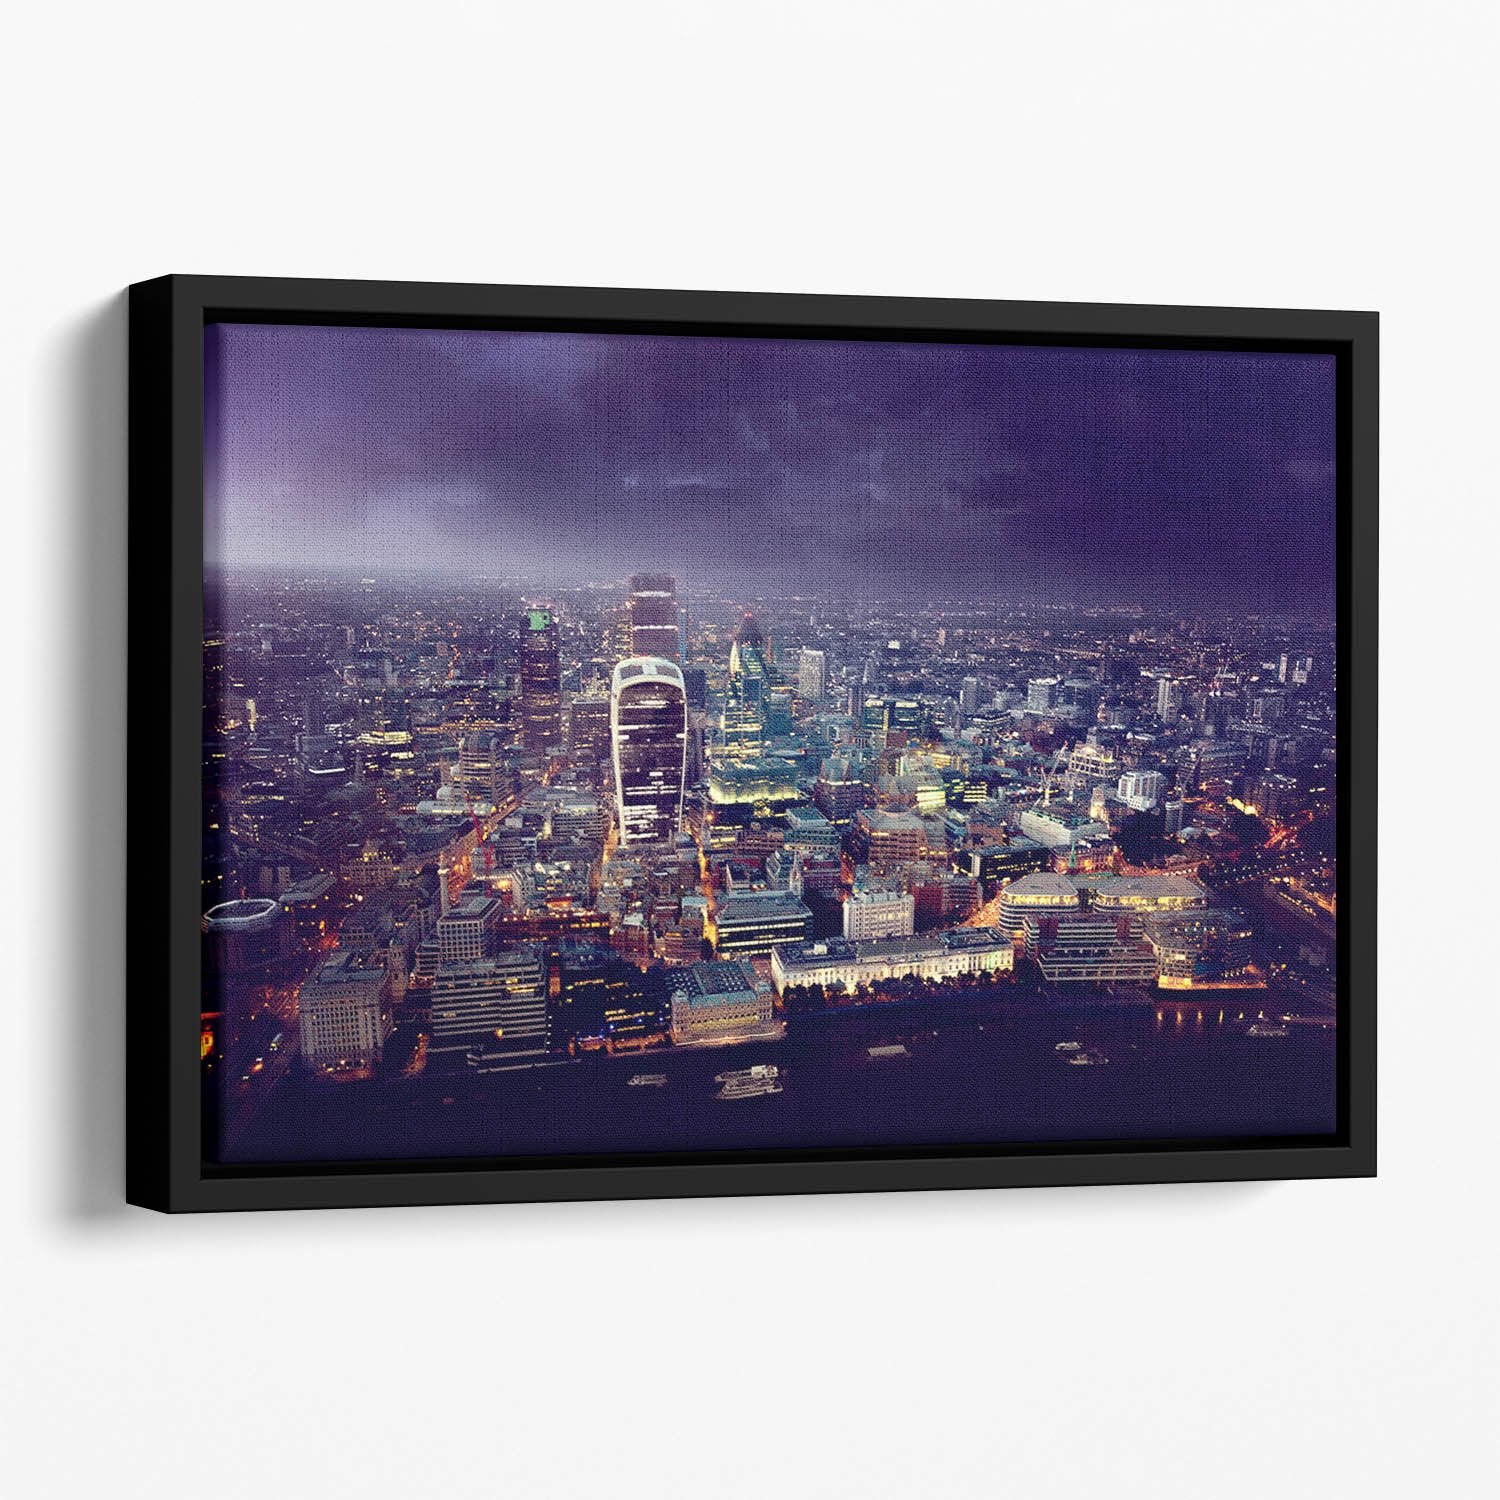 City of London At Sunset Floating Framed Canvas